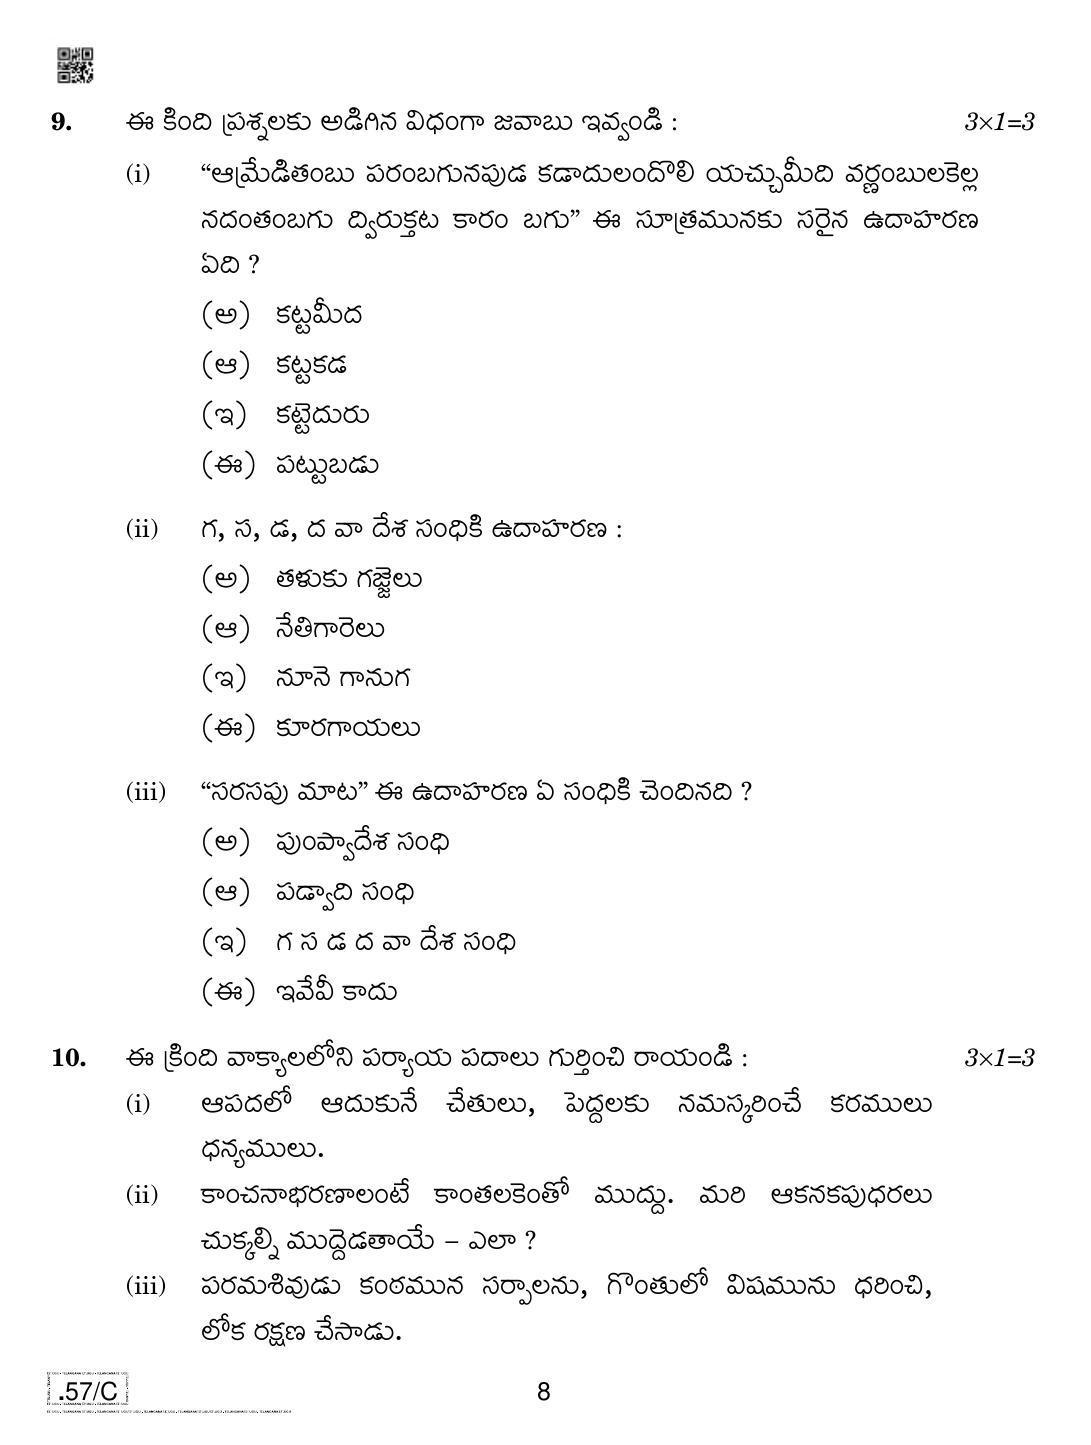 CBSE Class 10 Telug Telangana 2020 Compartment Question Paper - Page 8